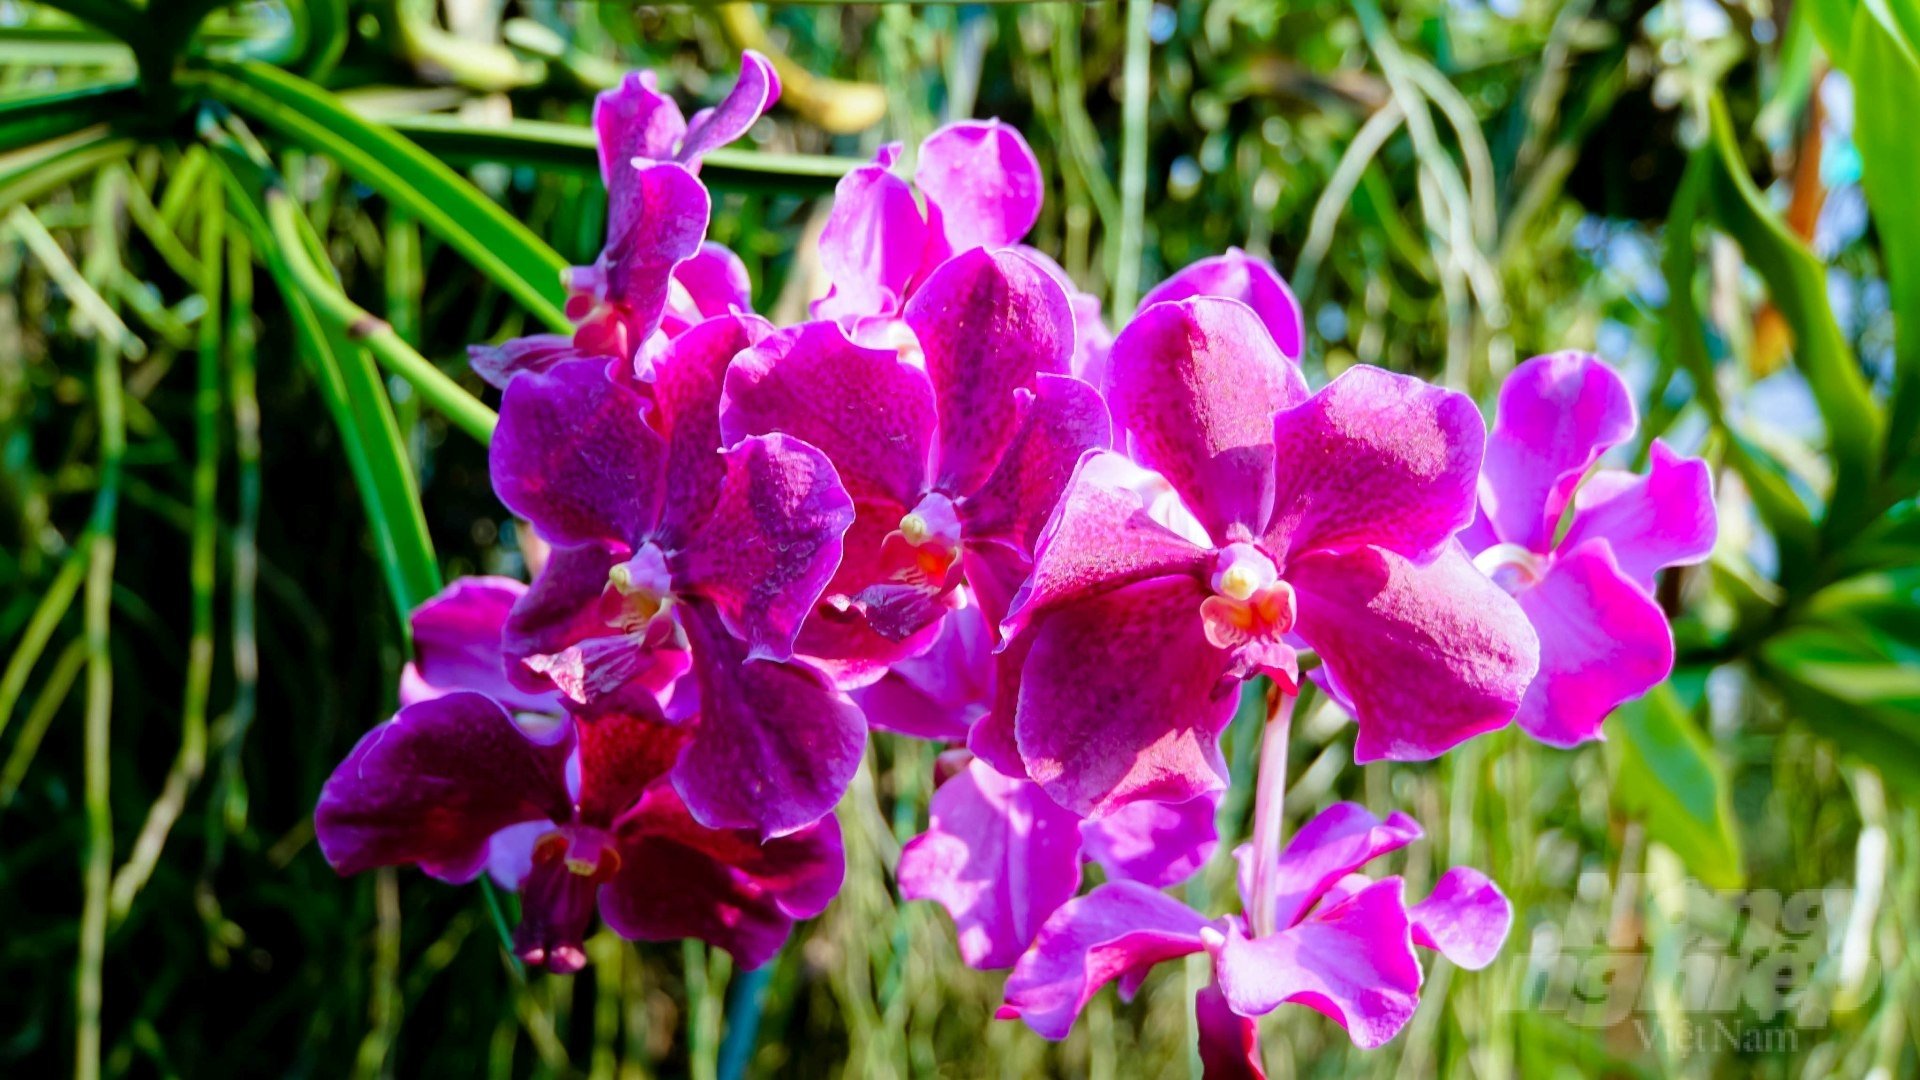 Tay Ninh expects orchids to soon become the main ornamental flower, anticipating the investment trend of businesses from all over the world, in line with the province's urban agriculture orientation. Photo: Le Binh.